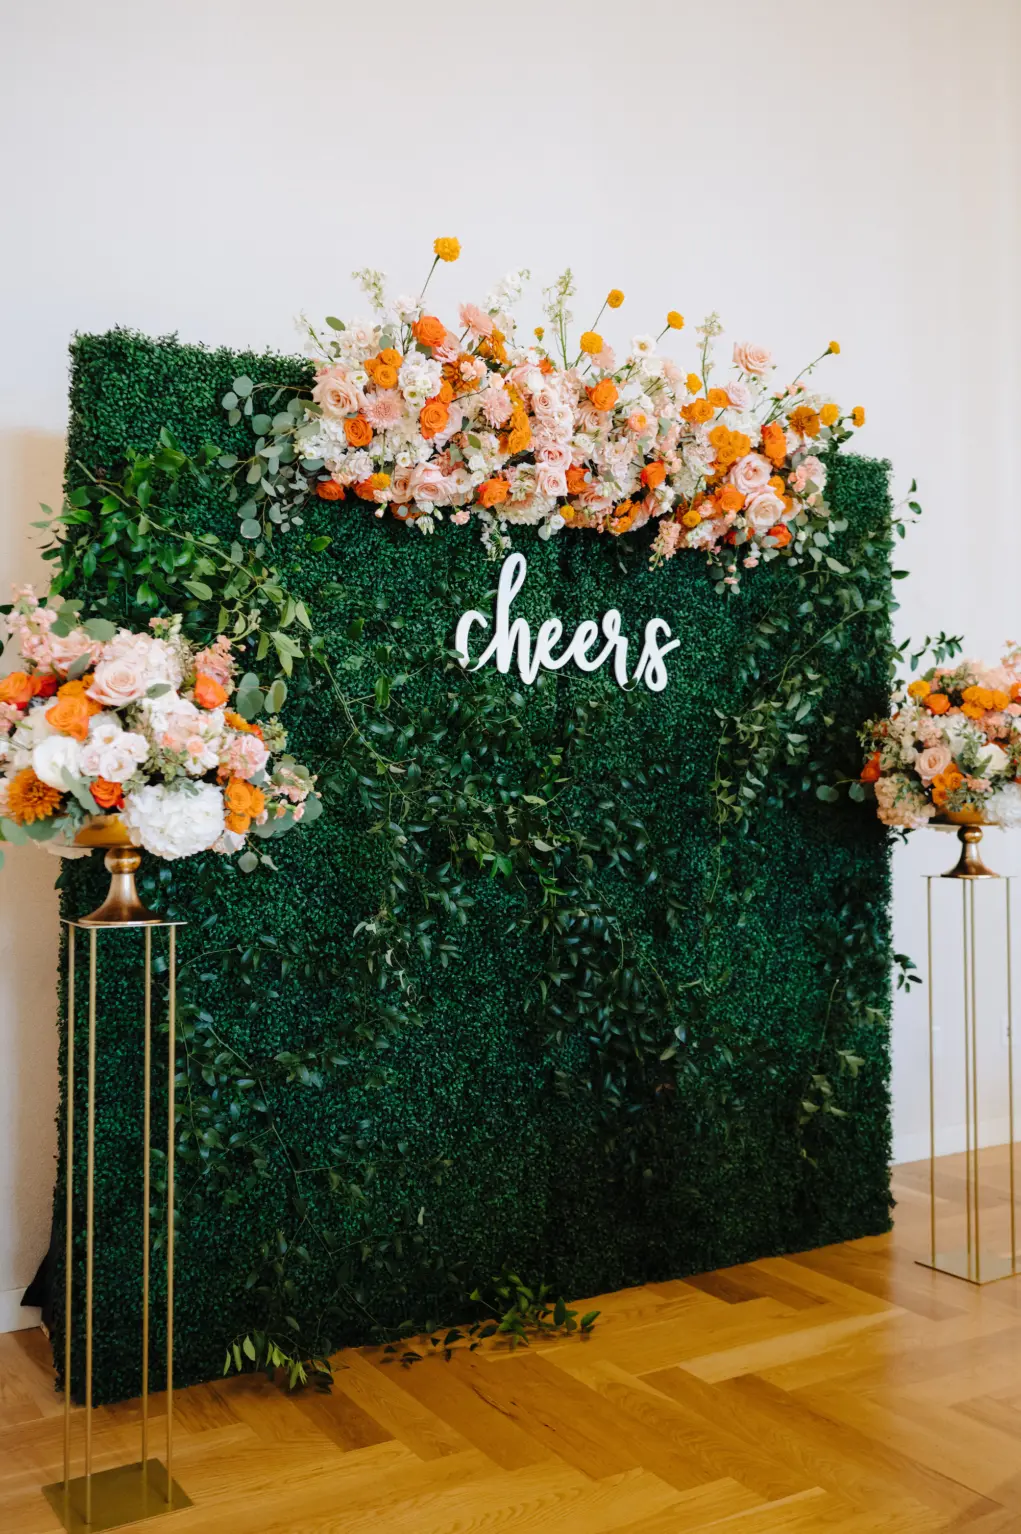 Cheers Orange and Pink Greenery Photo Booth Backdrop Ideas for Spring Wedding Reception